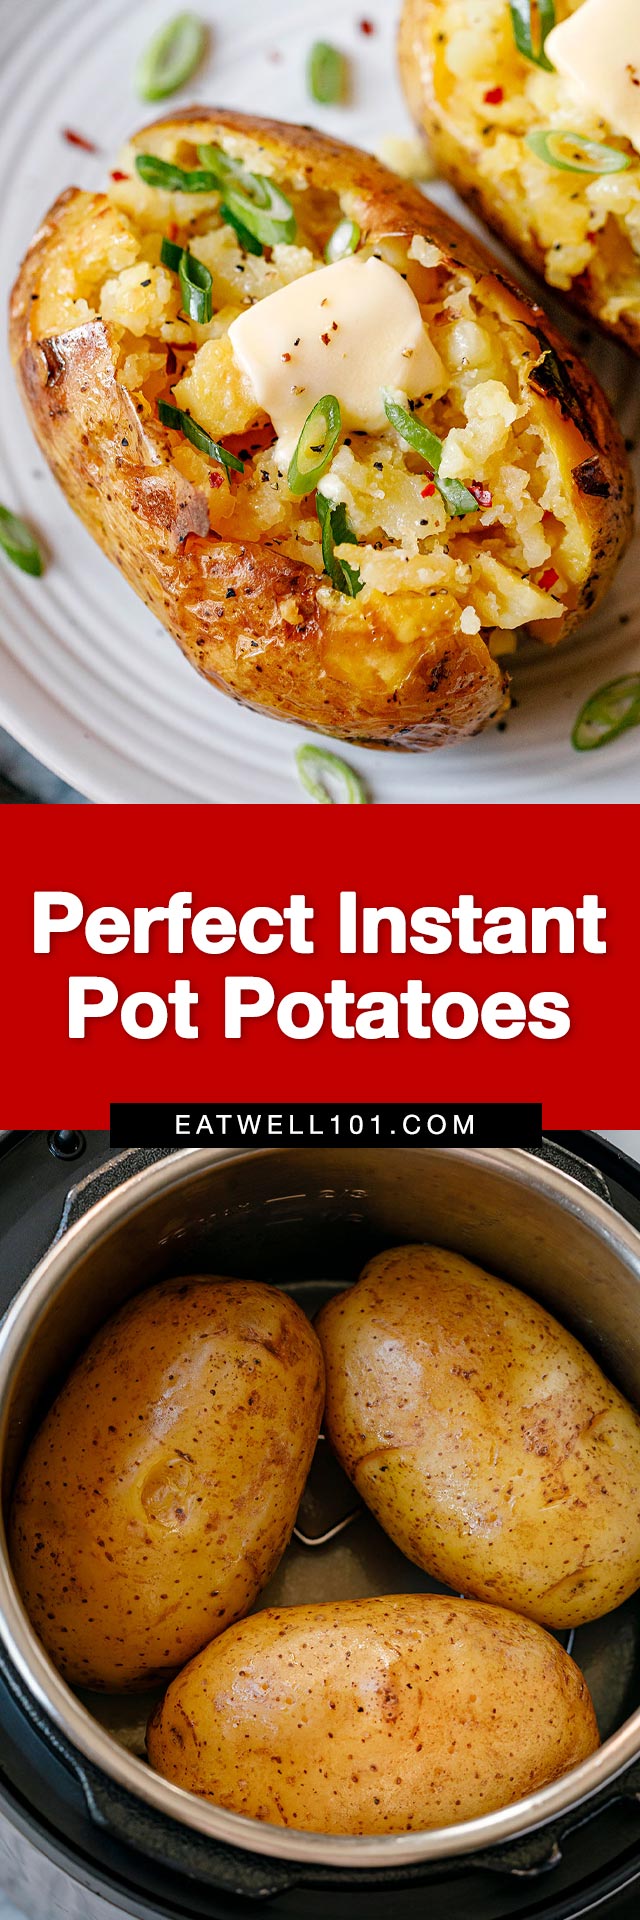 Perfect Instant Pot Potato - #instantpot #potato #recipe #eatwell101 - Perfect Instant Pot Potato has crispy skin and fluffy insides. Our method for how to pressure cook a potato works every time, so load up your spuds, and dig in!